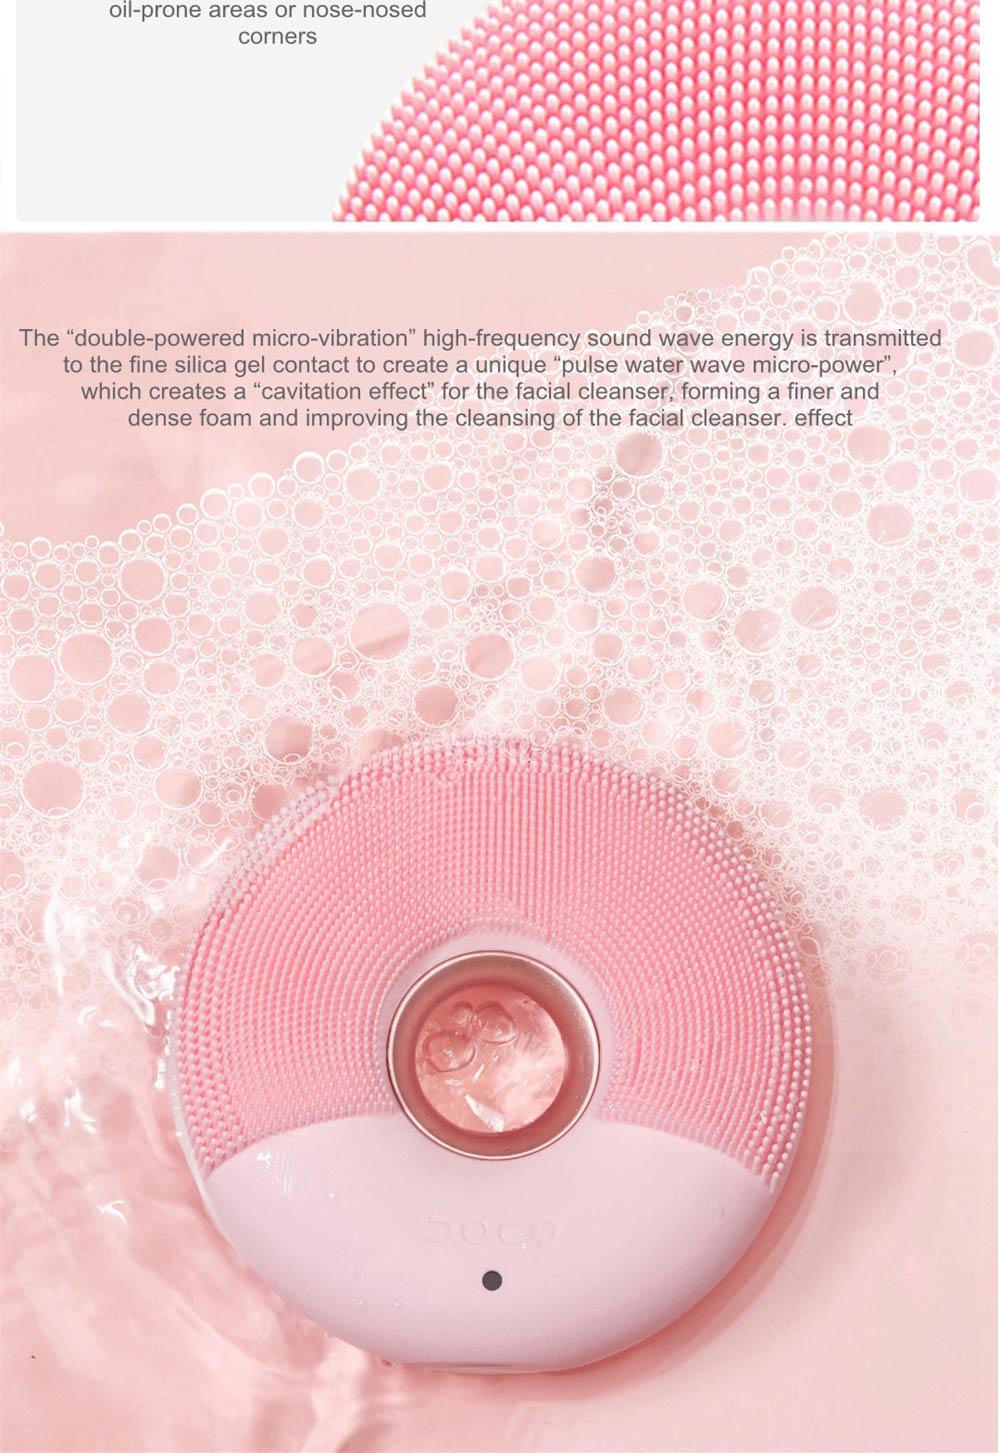 2019 xiaomi doco sonic cleansing instrument